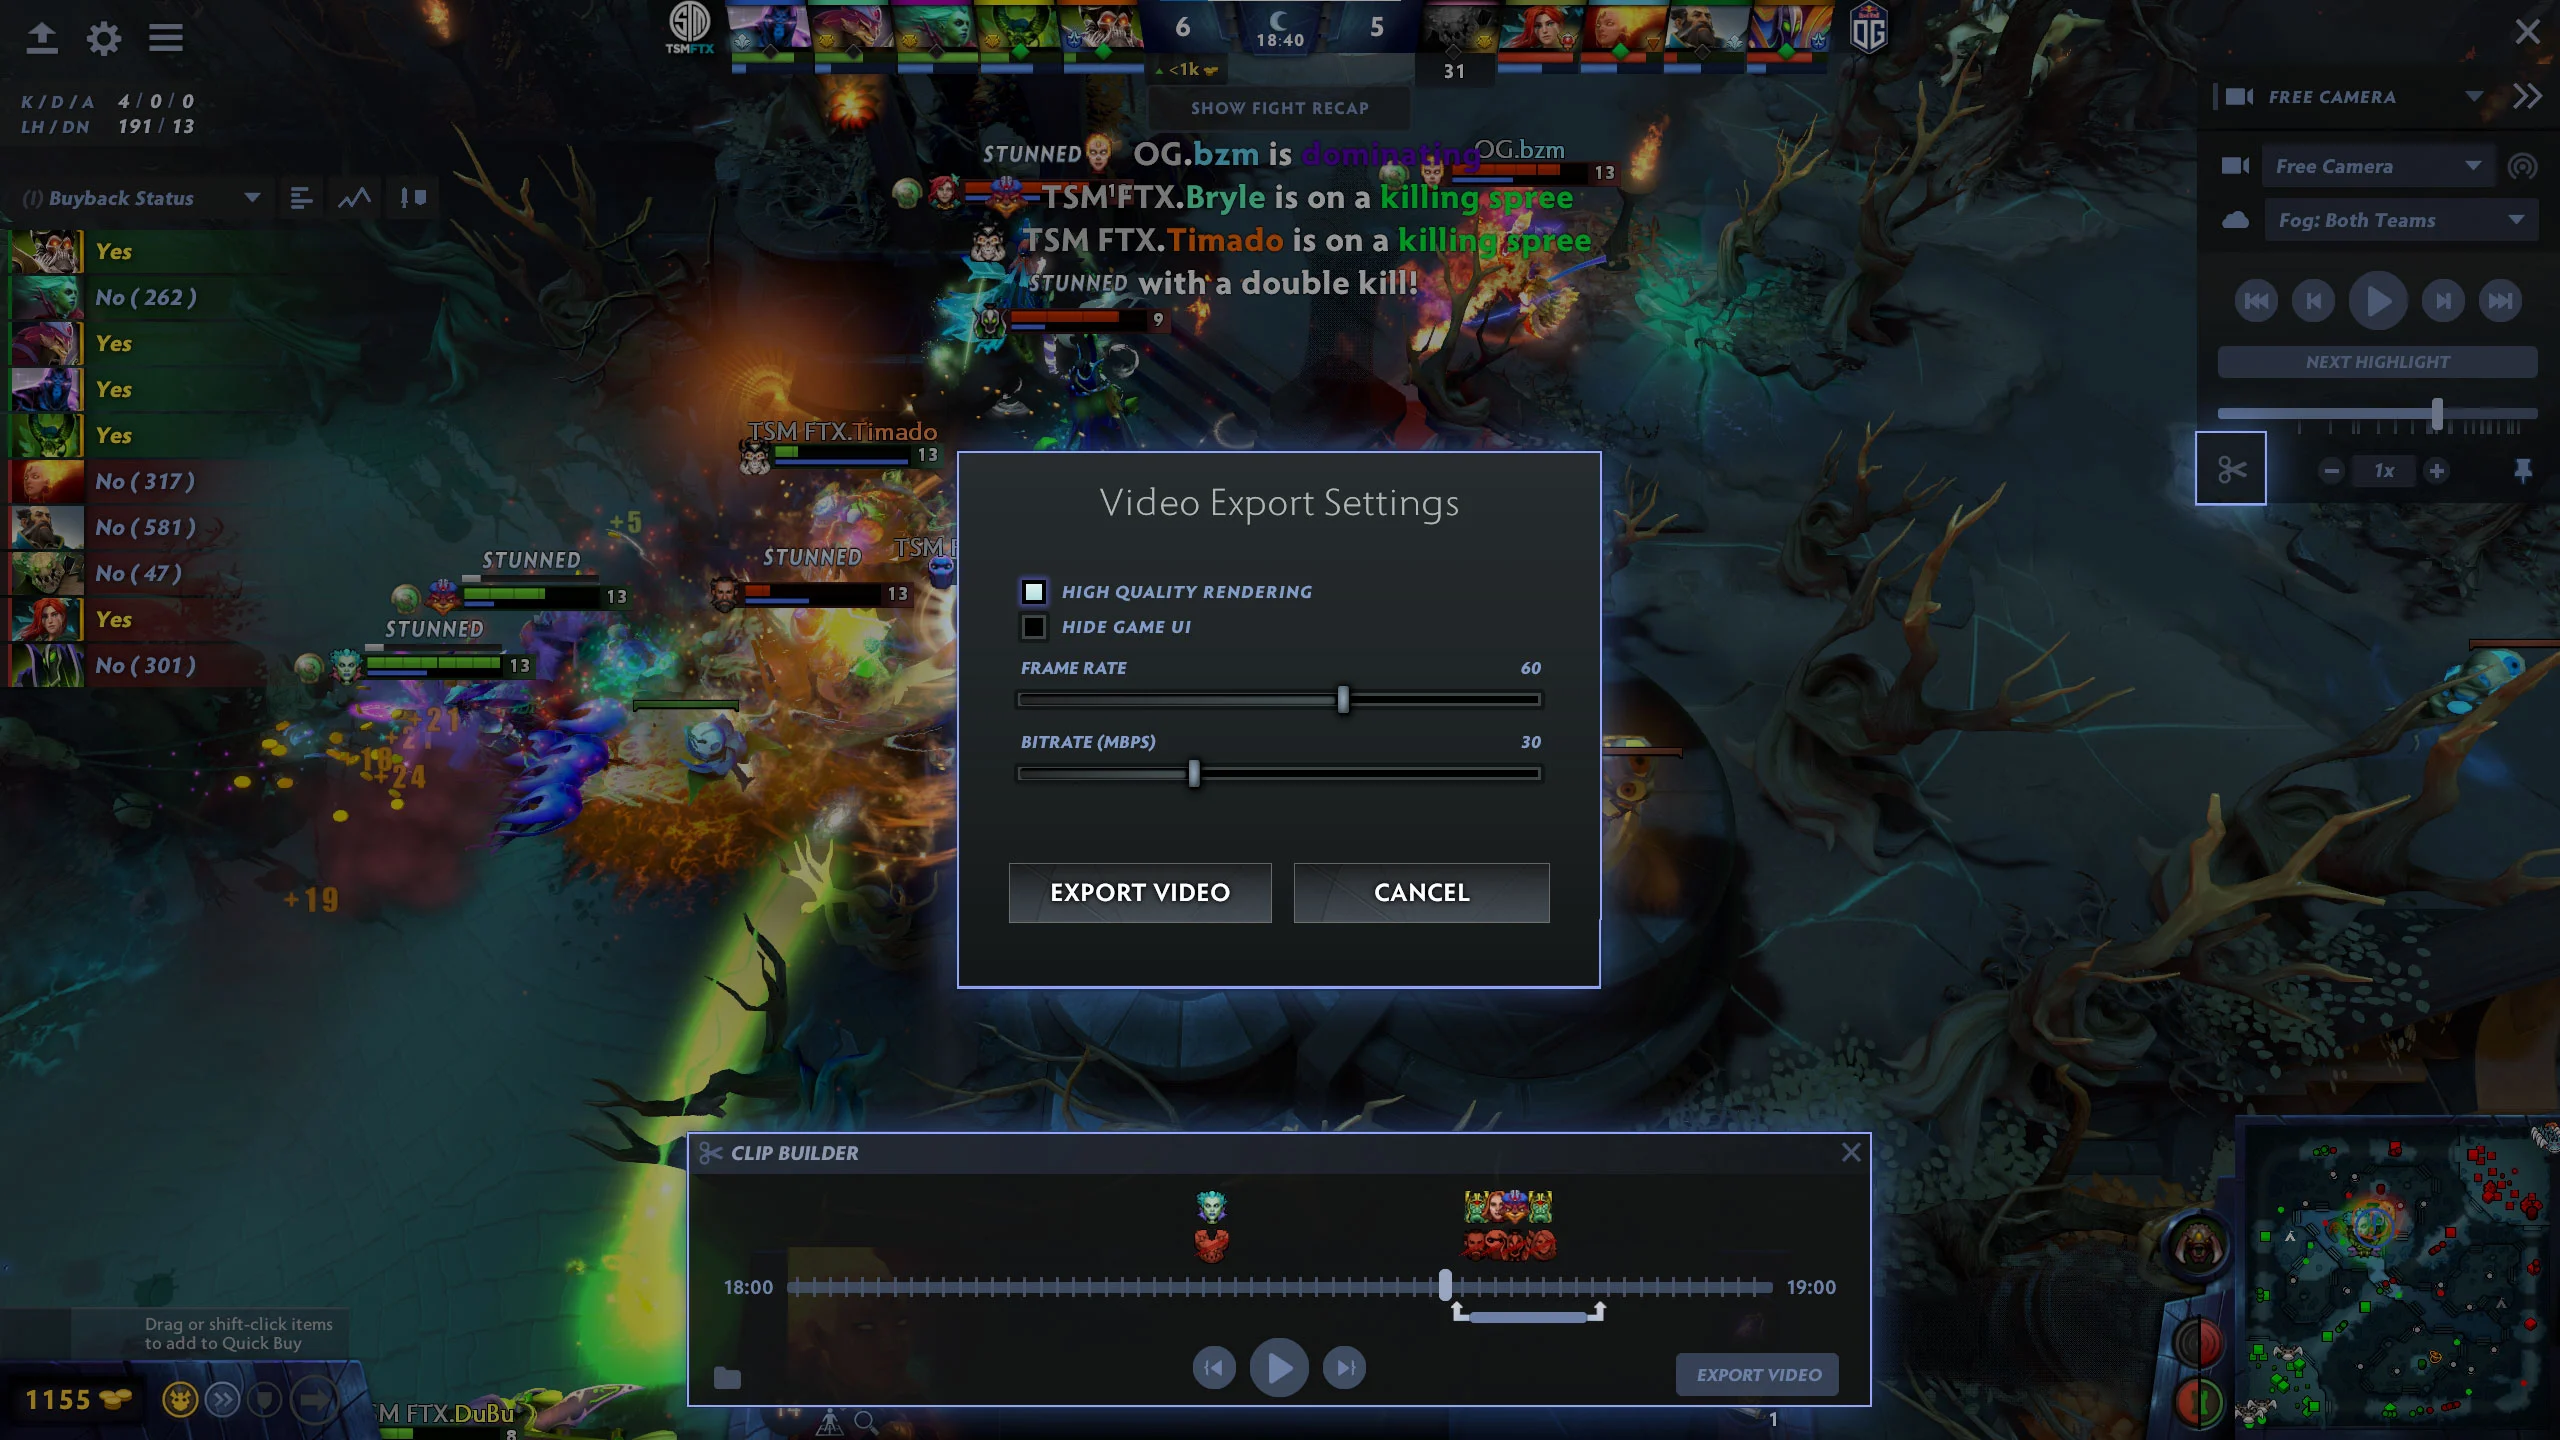 Video Export Settings (Image Source: Valve)